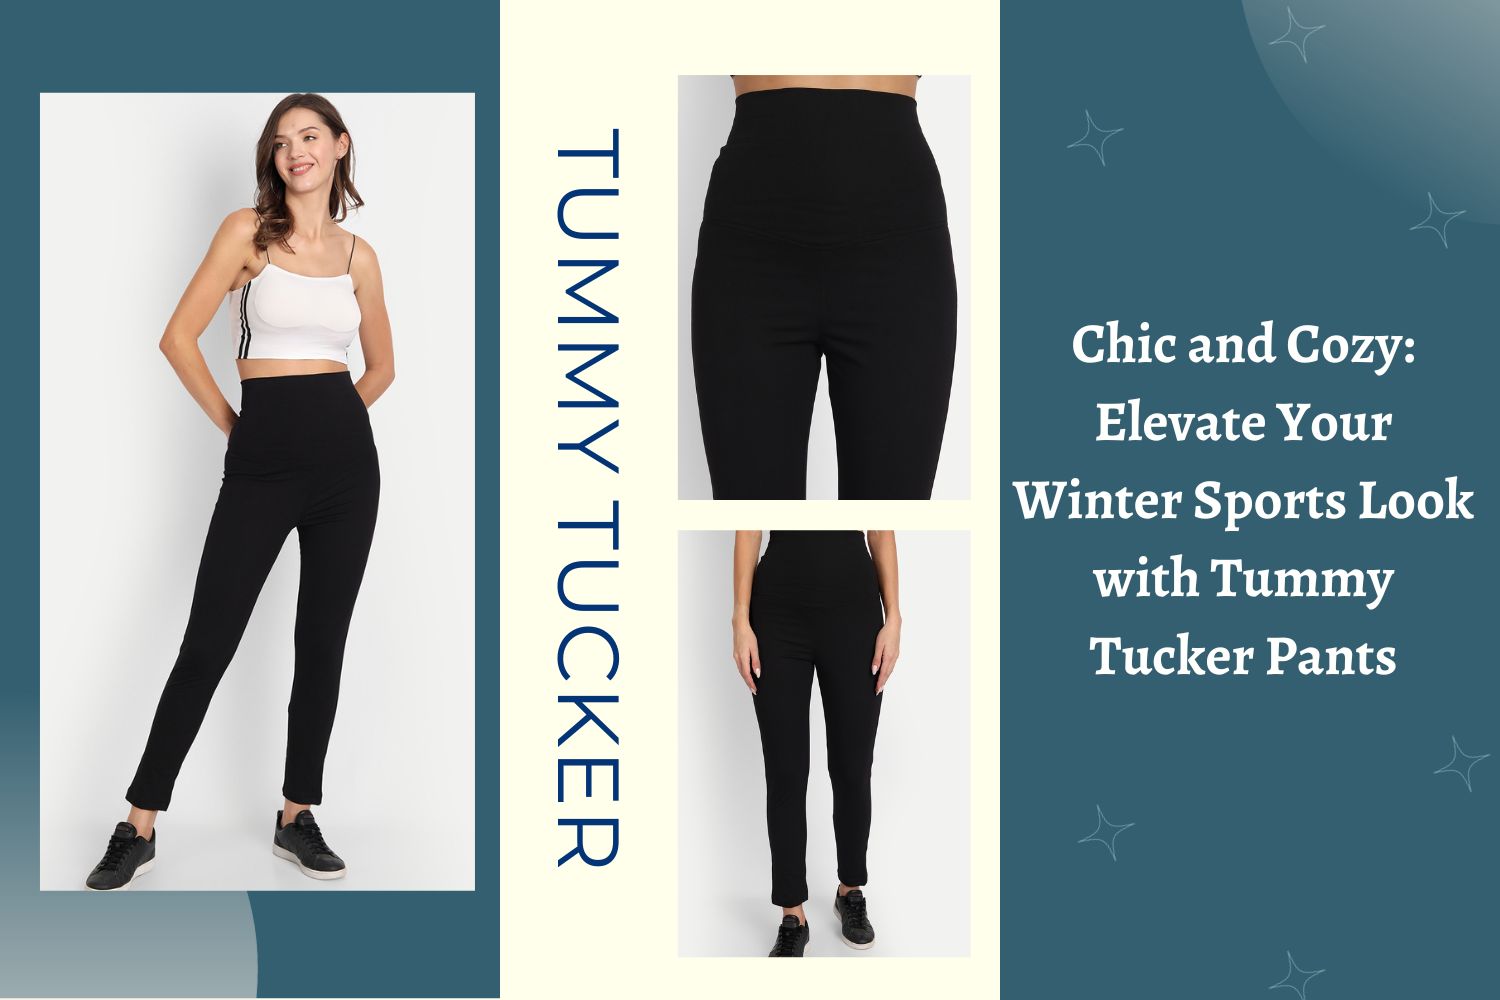 Chic and Cozy: Elevate Your Winter Sports Look with Tummy Tucker